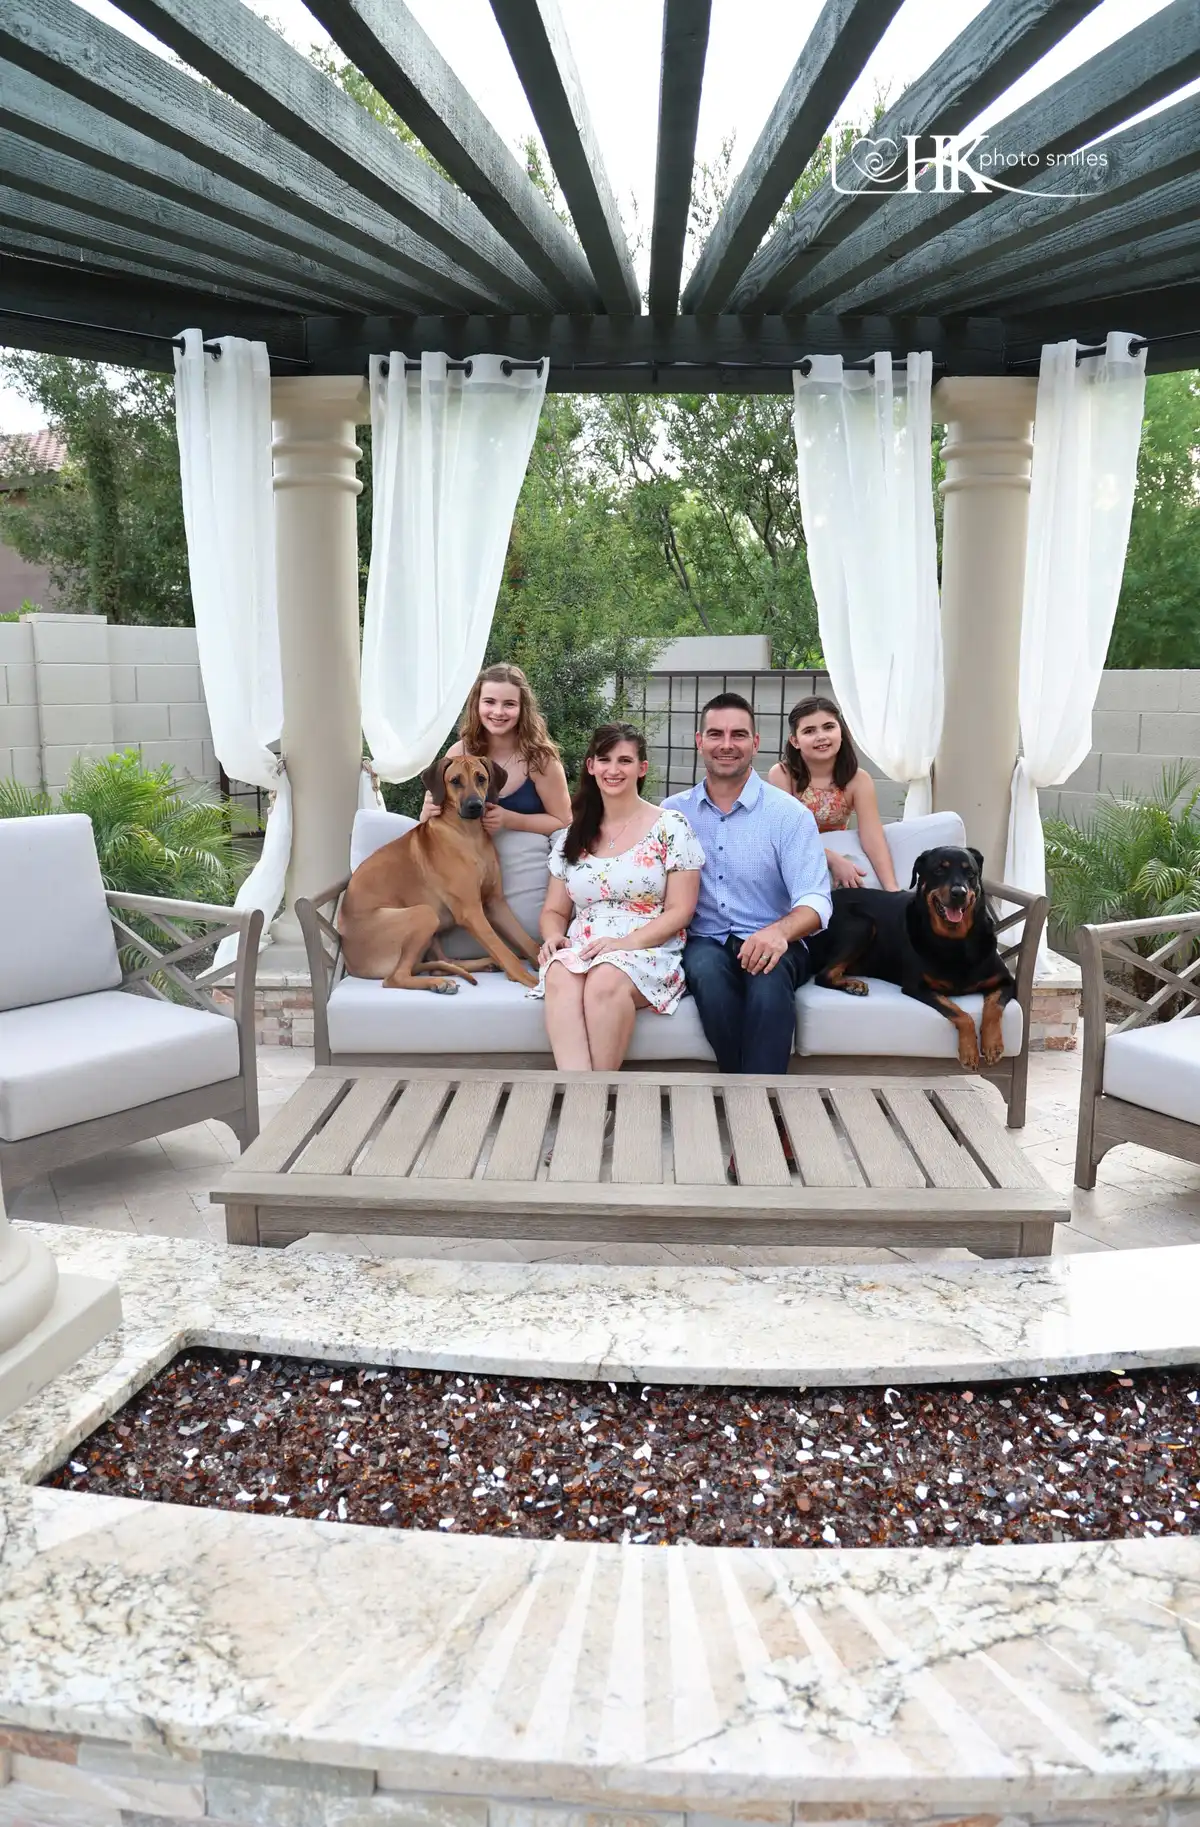 Family portrait of 4 and 2 dogs on family patio with fireplace